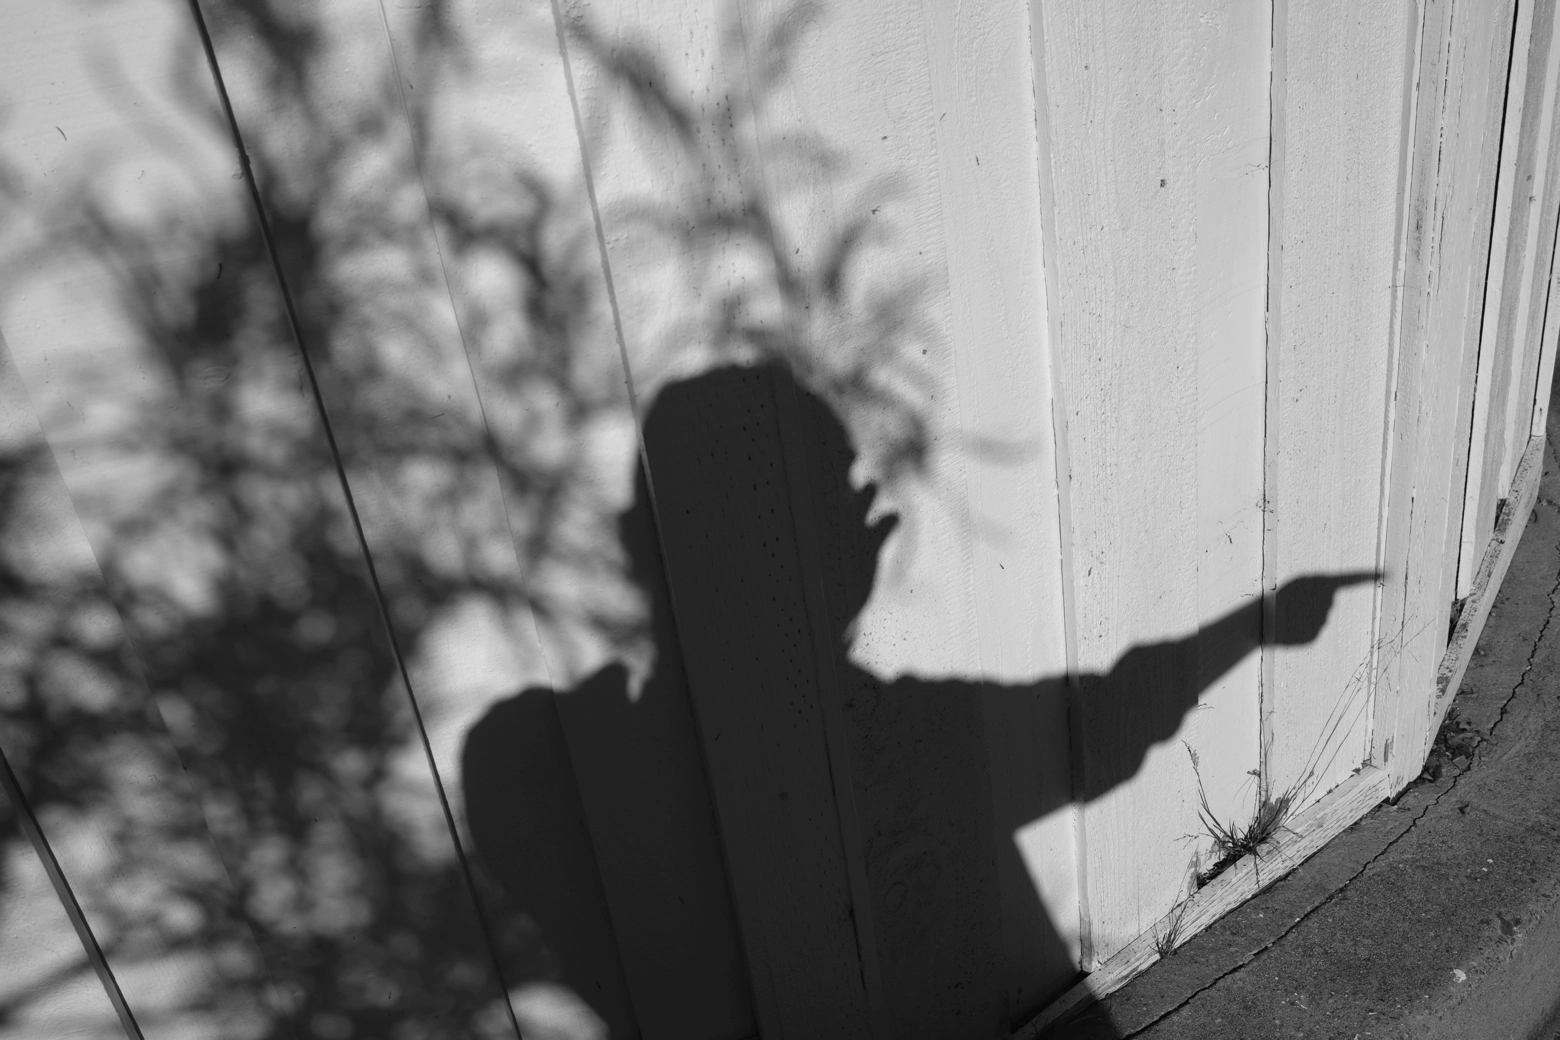 A human shadow distorted across a wooden fence with a finger extended, pointing to the right